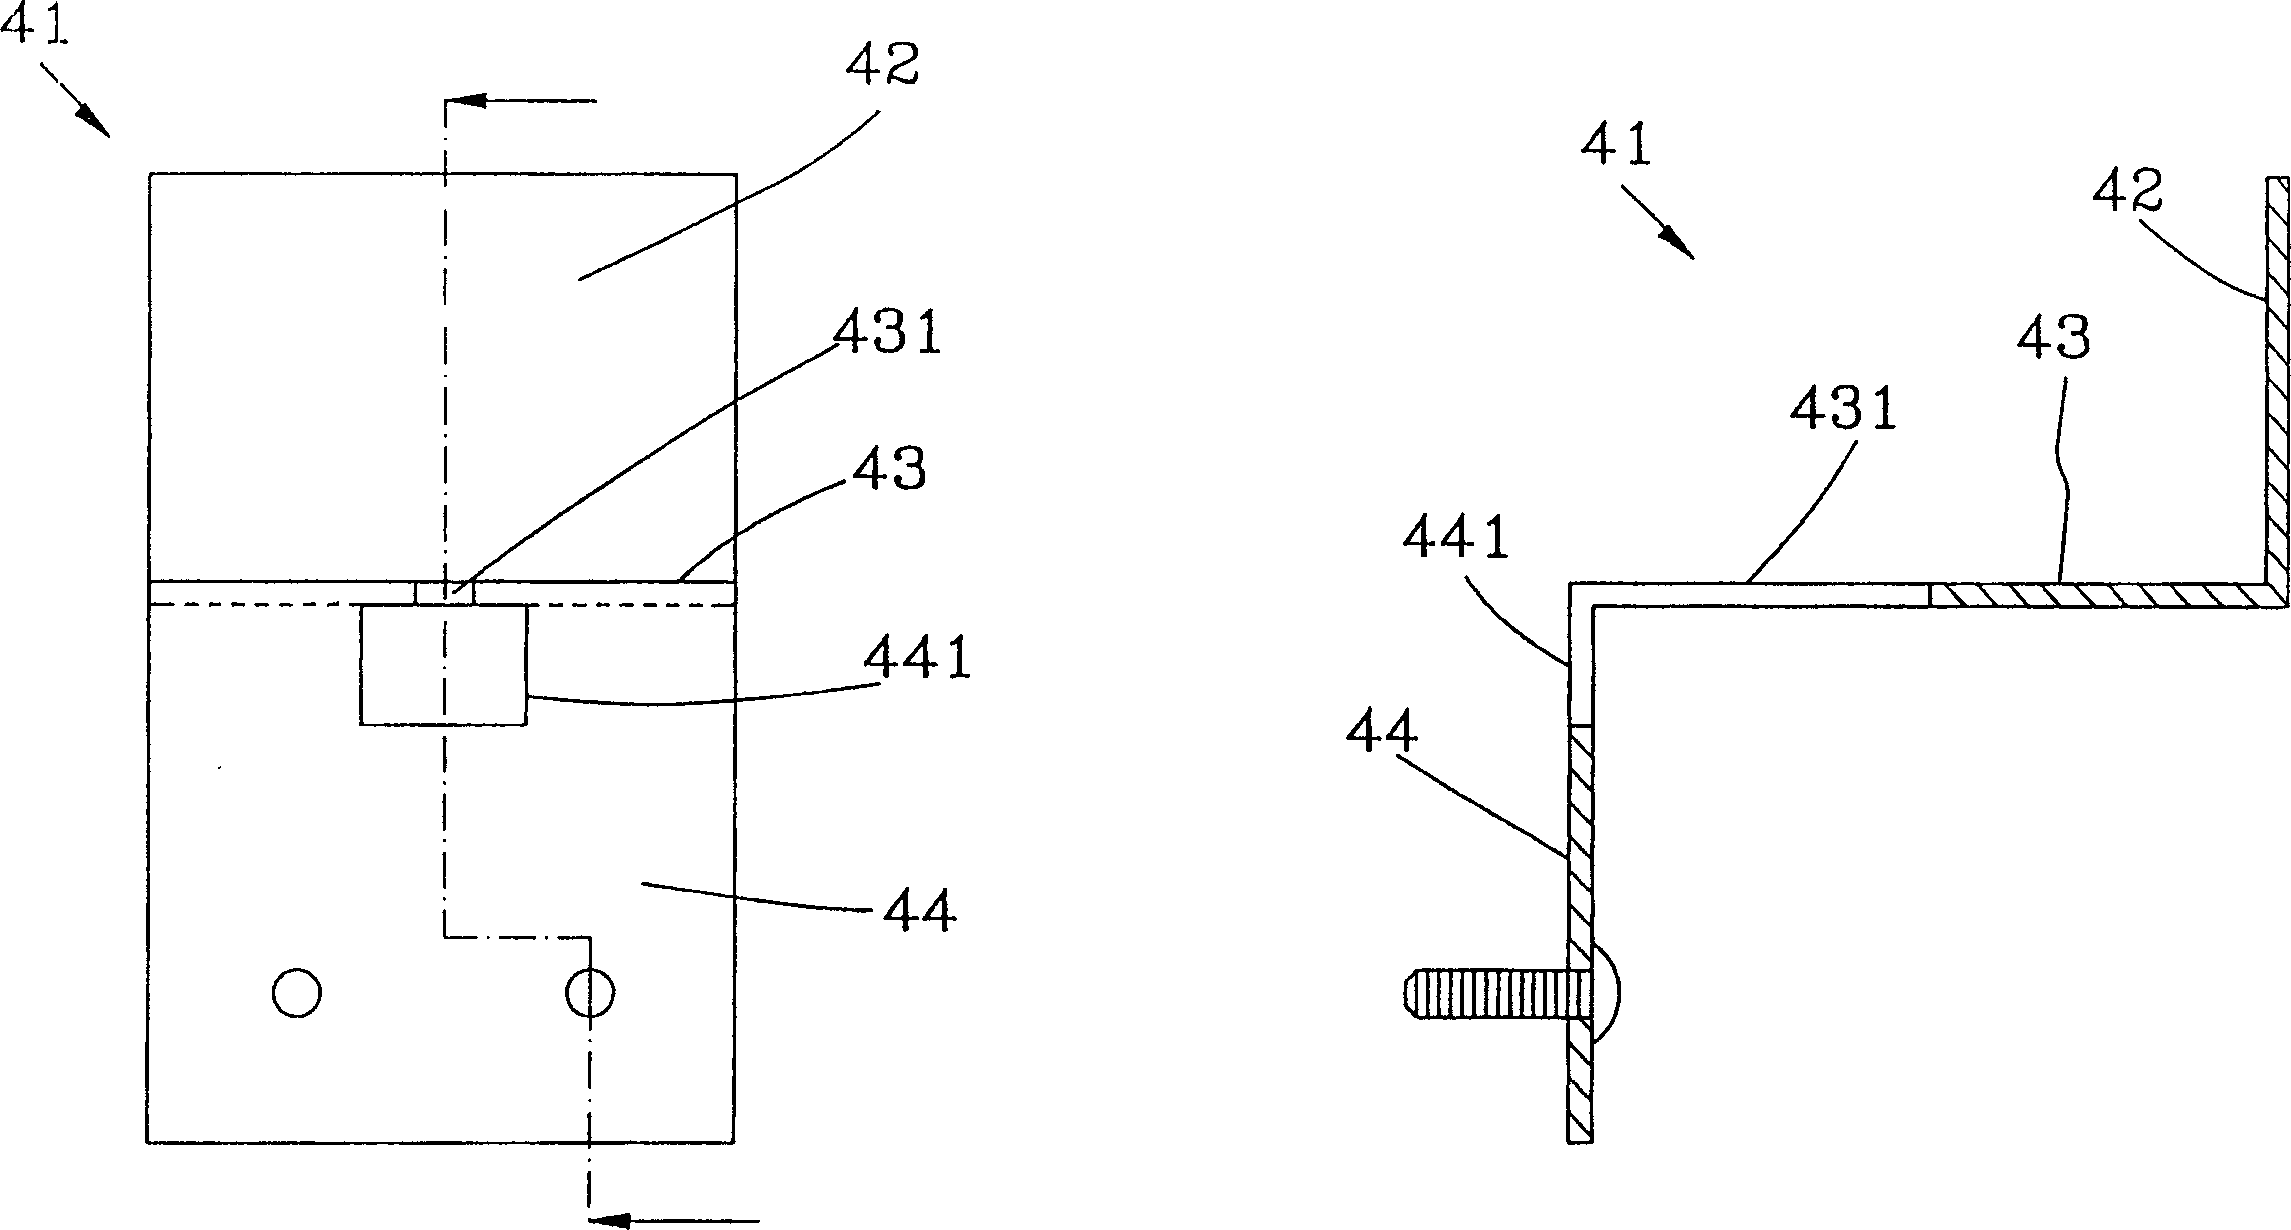 Mechanical linkage device for conducting valve